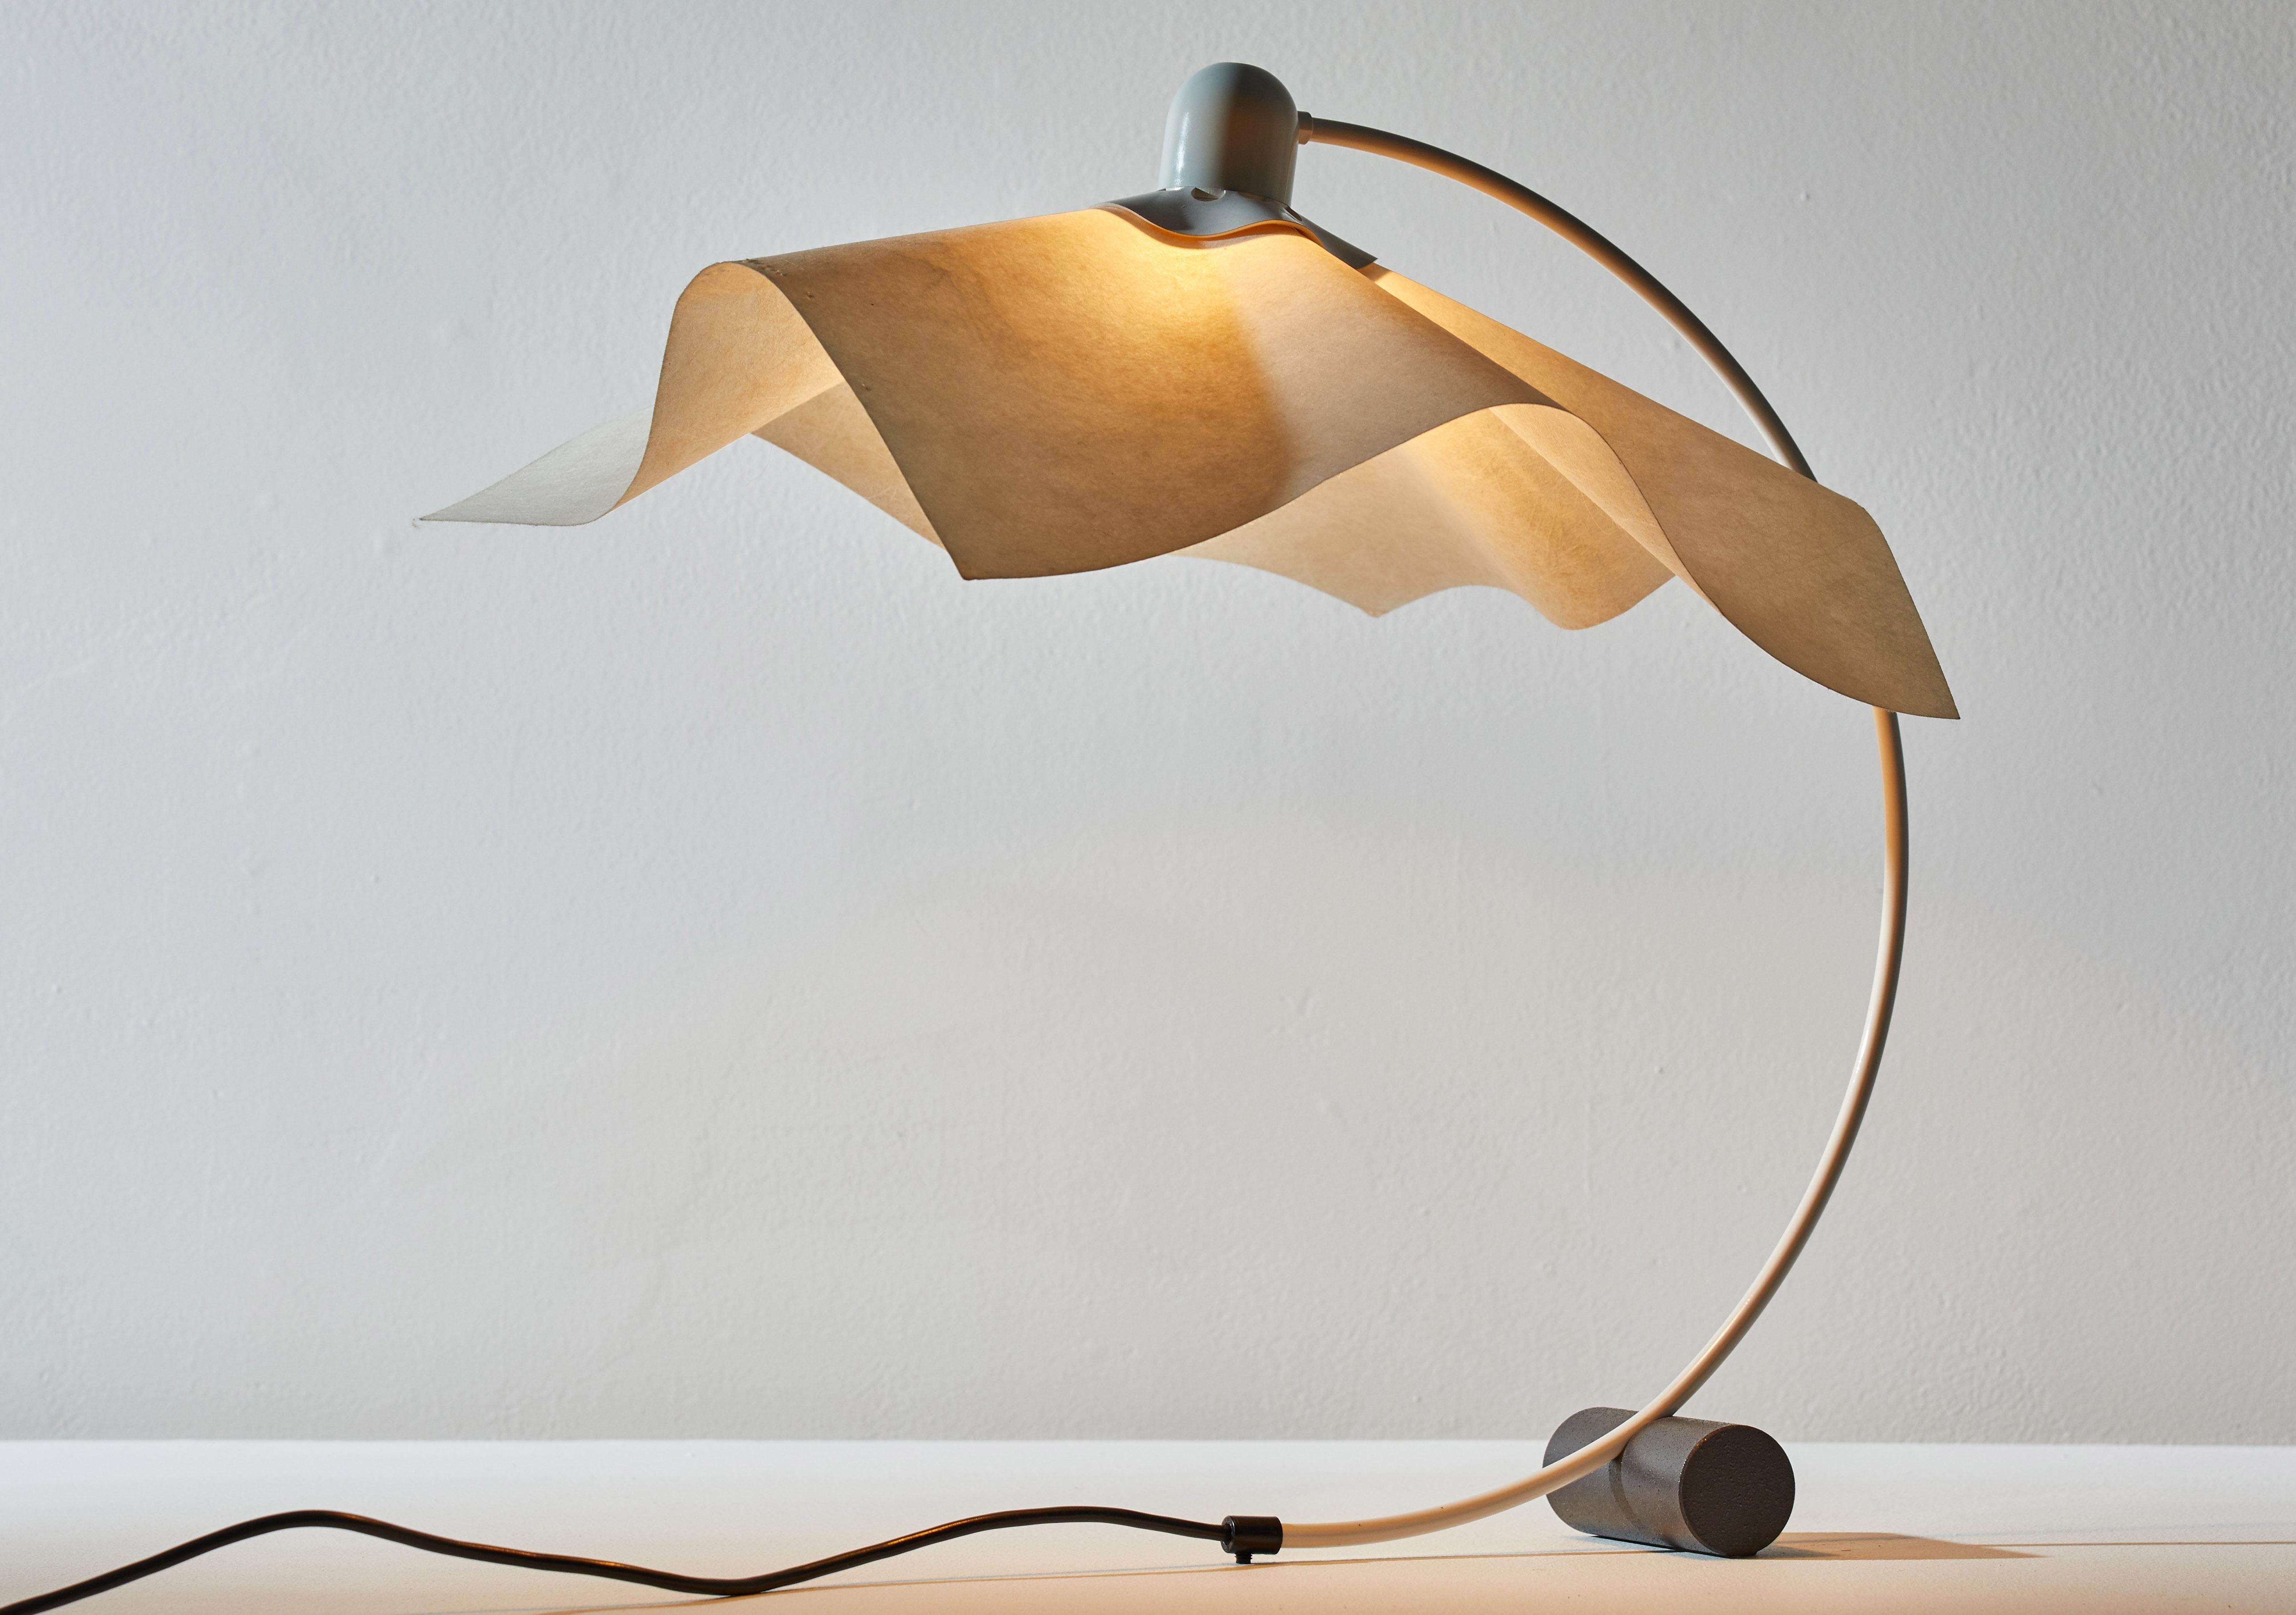 Area Curvea table lamp by Mario Bellini & Giorgio Origlia for Artemide. Designed and manufactured in Italy, circa 1974. Steel, acrylic, with resin shade. Original cord wired for U.S. sockets. Takes one E27 60w maximum bulb.
  